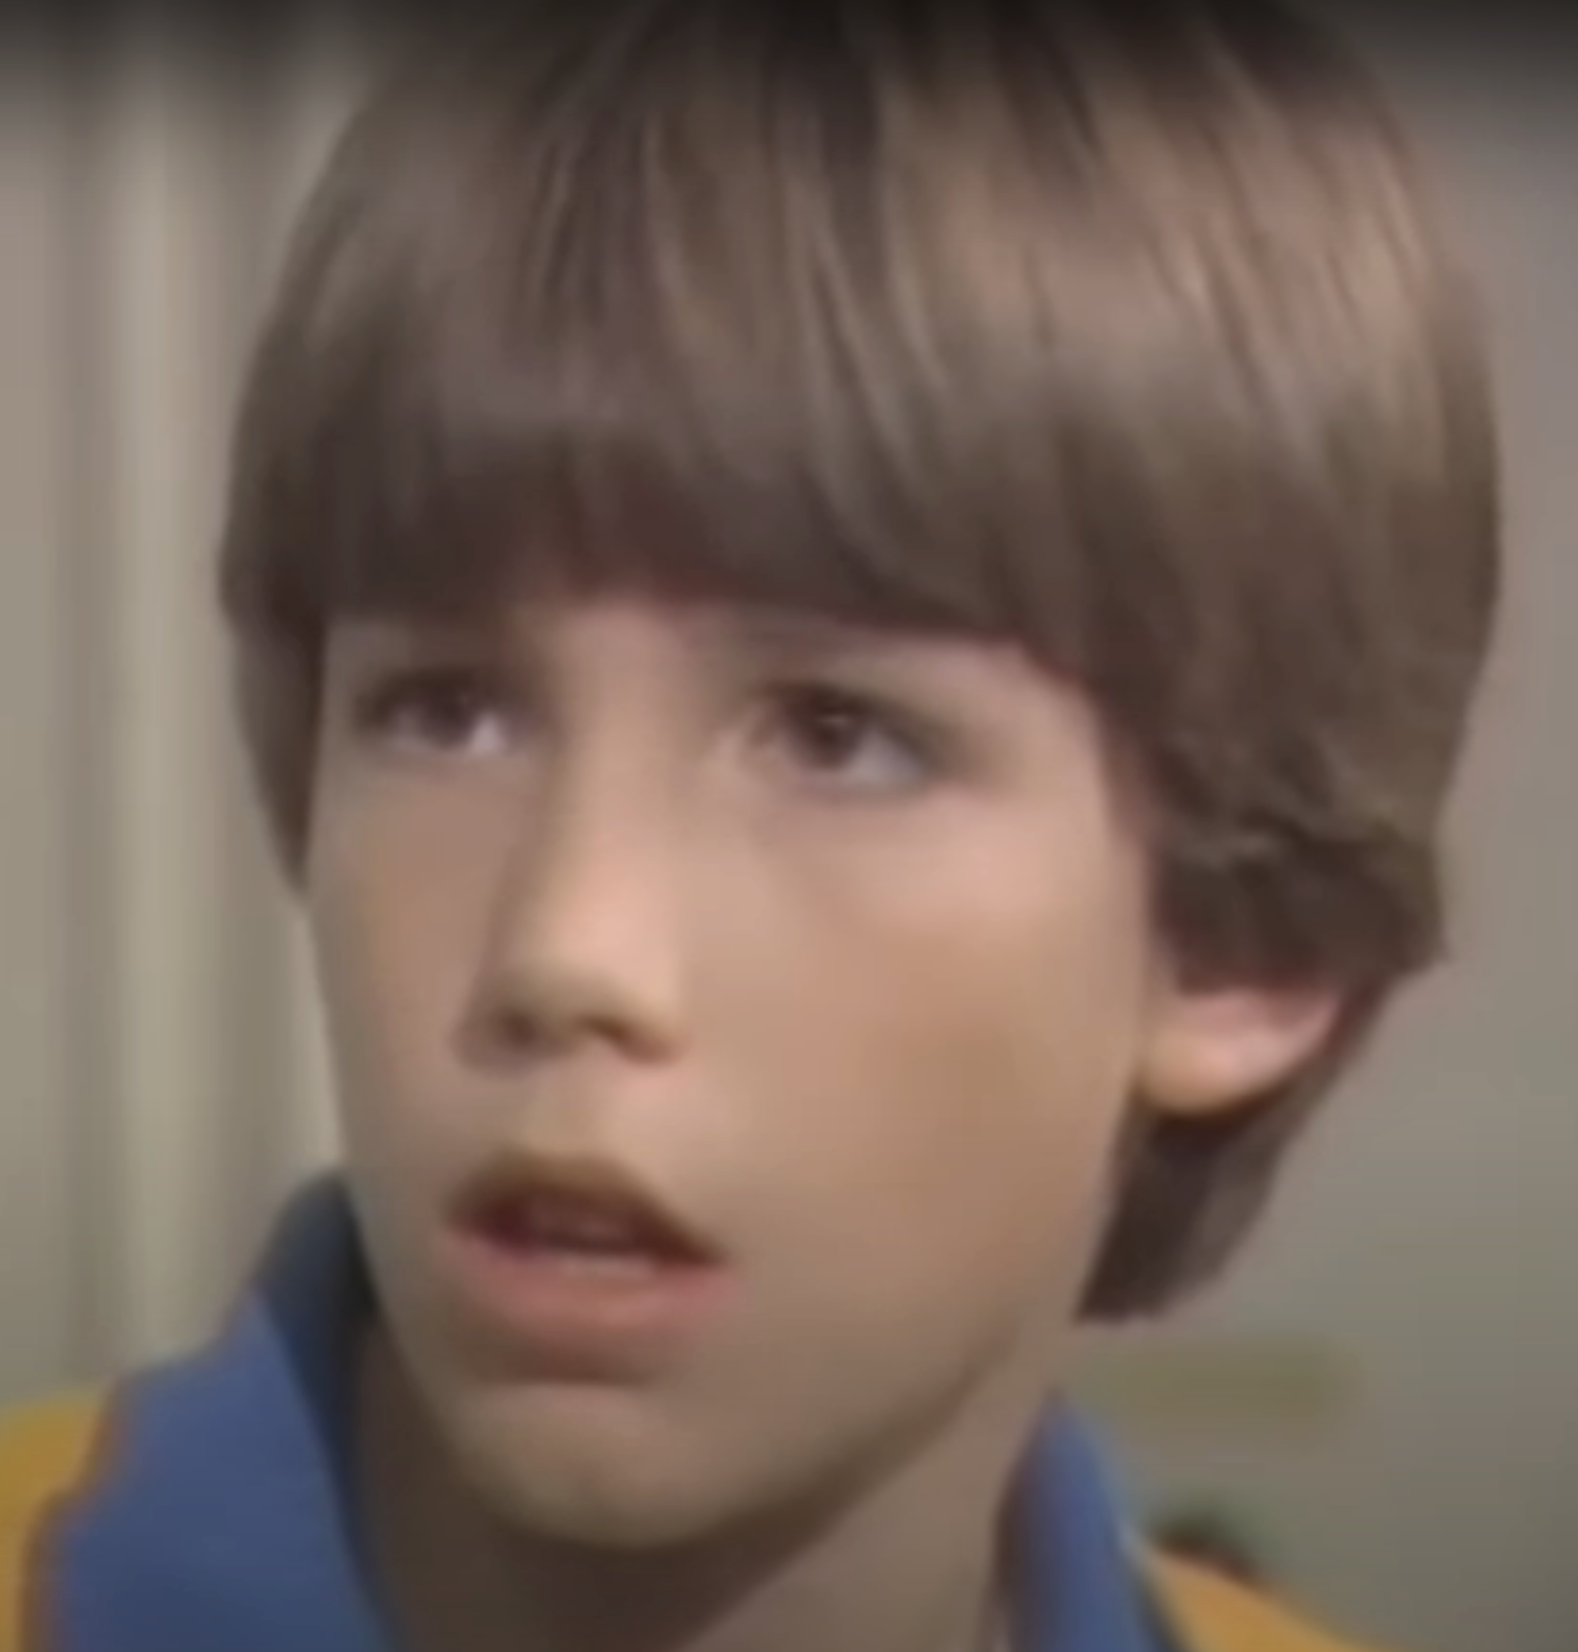 Close-up of a young Ben portraying emotion, wearing a striped shirt